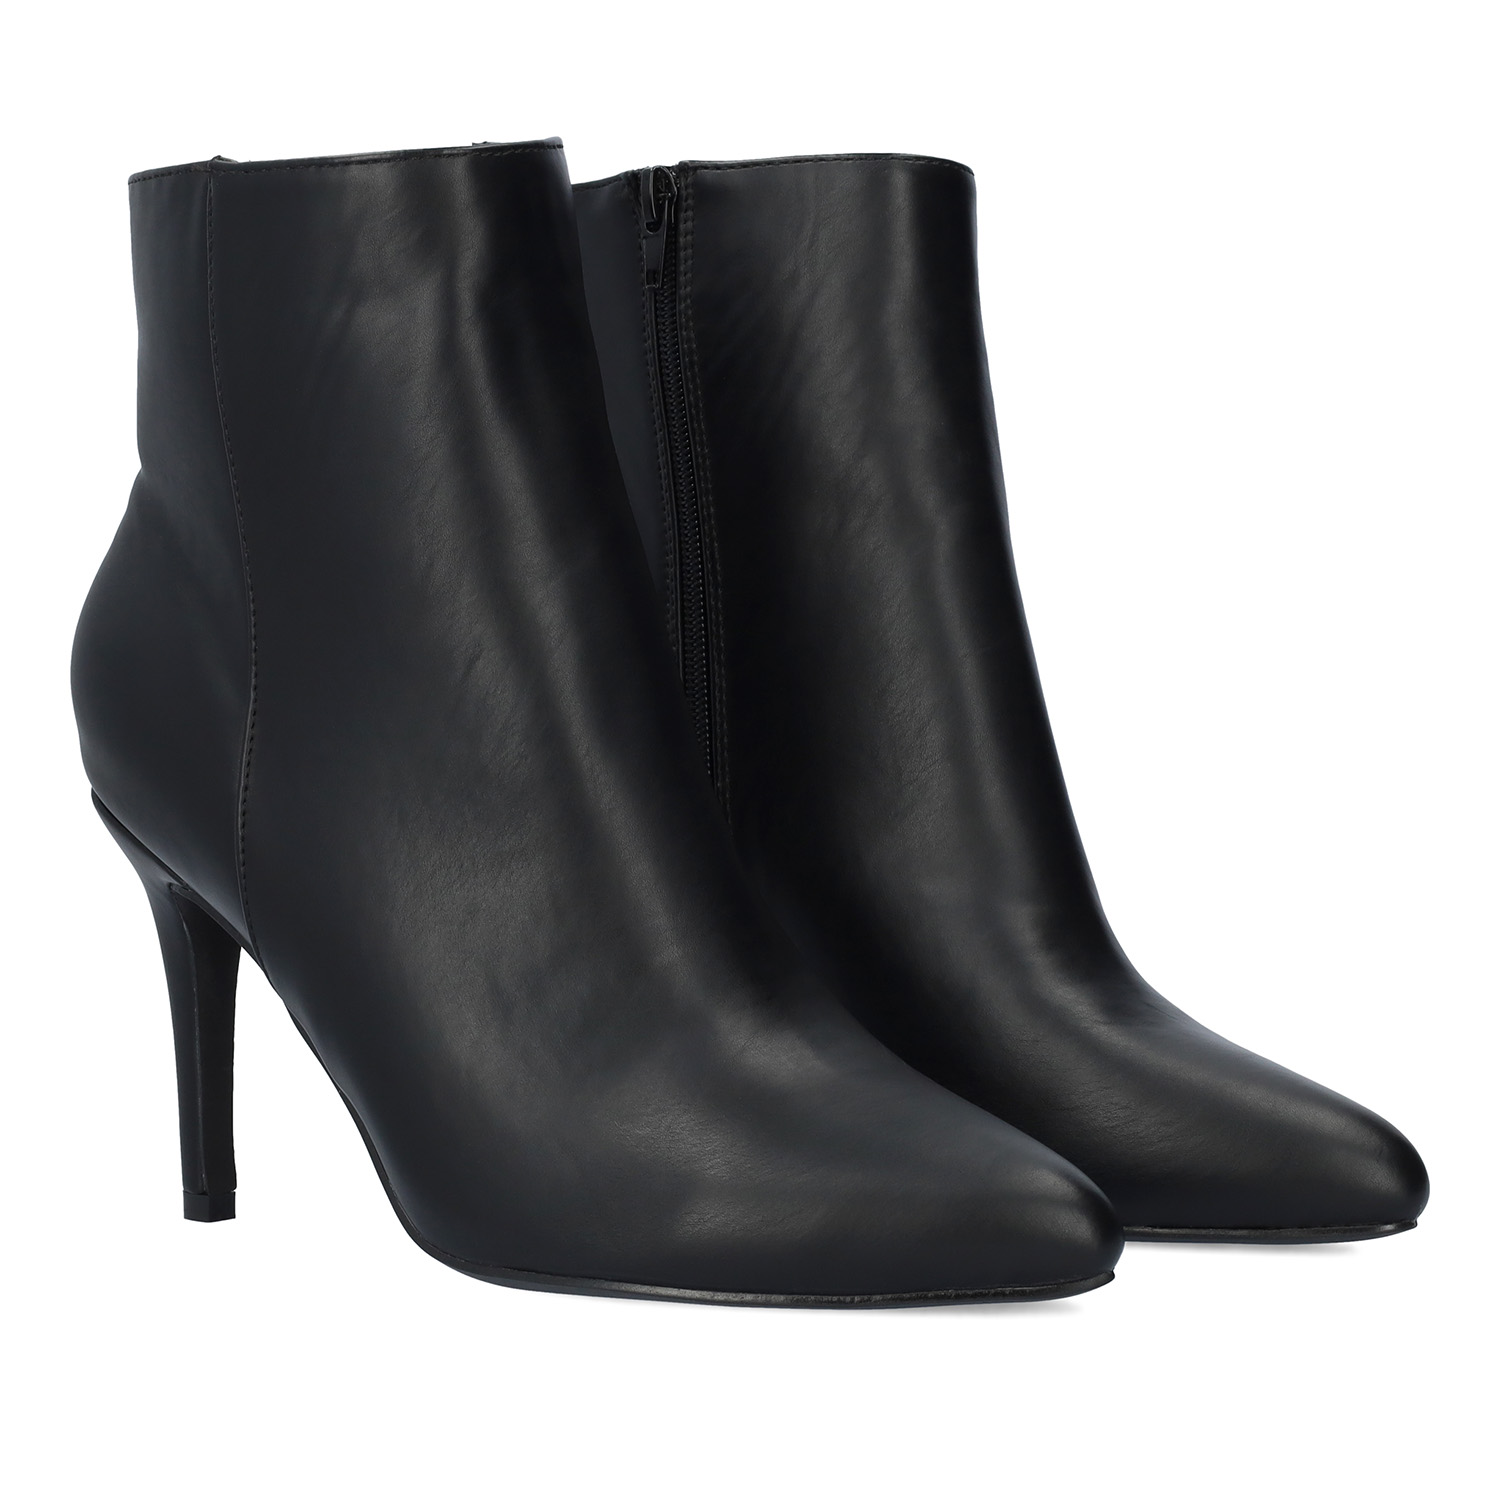 High-heeled booties in black faux leather